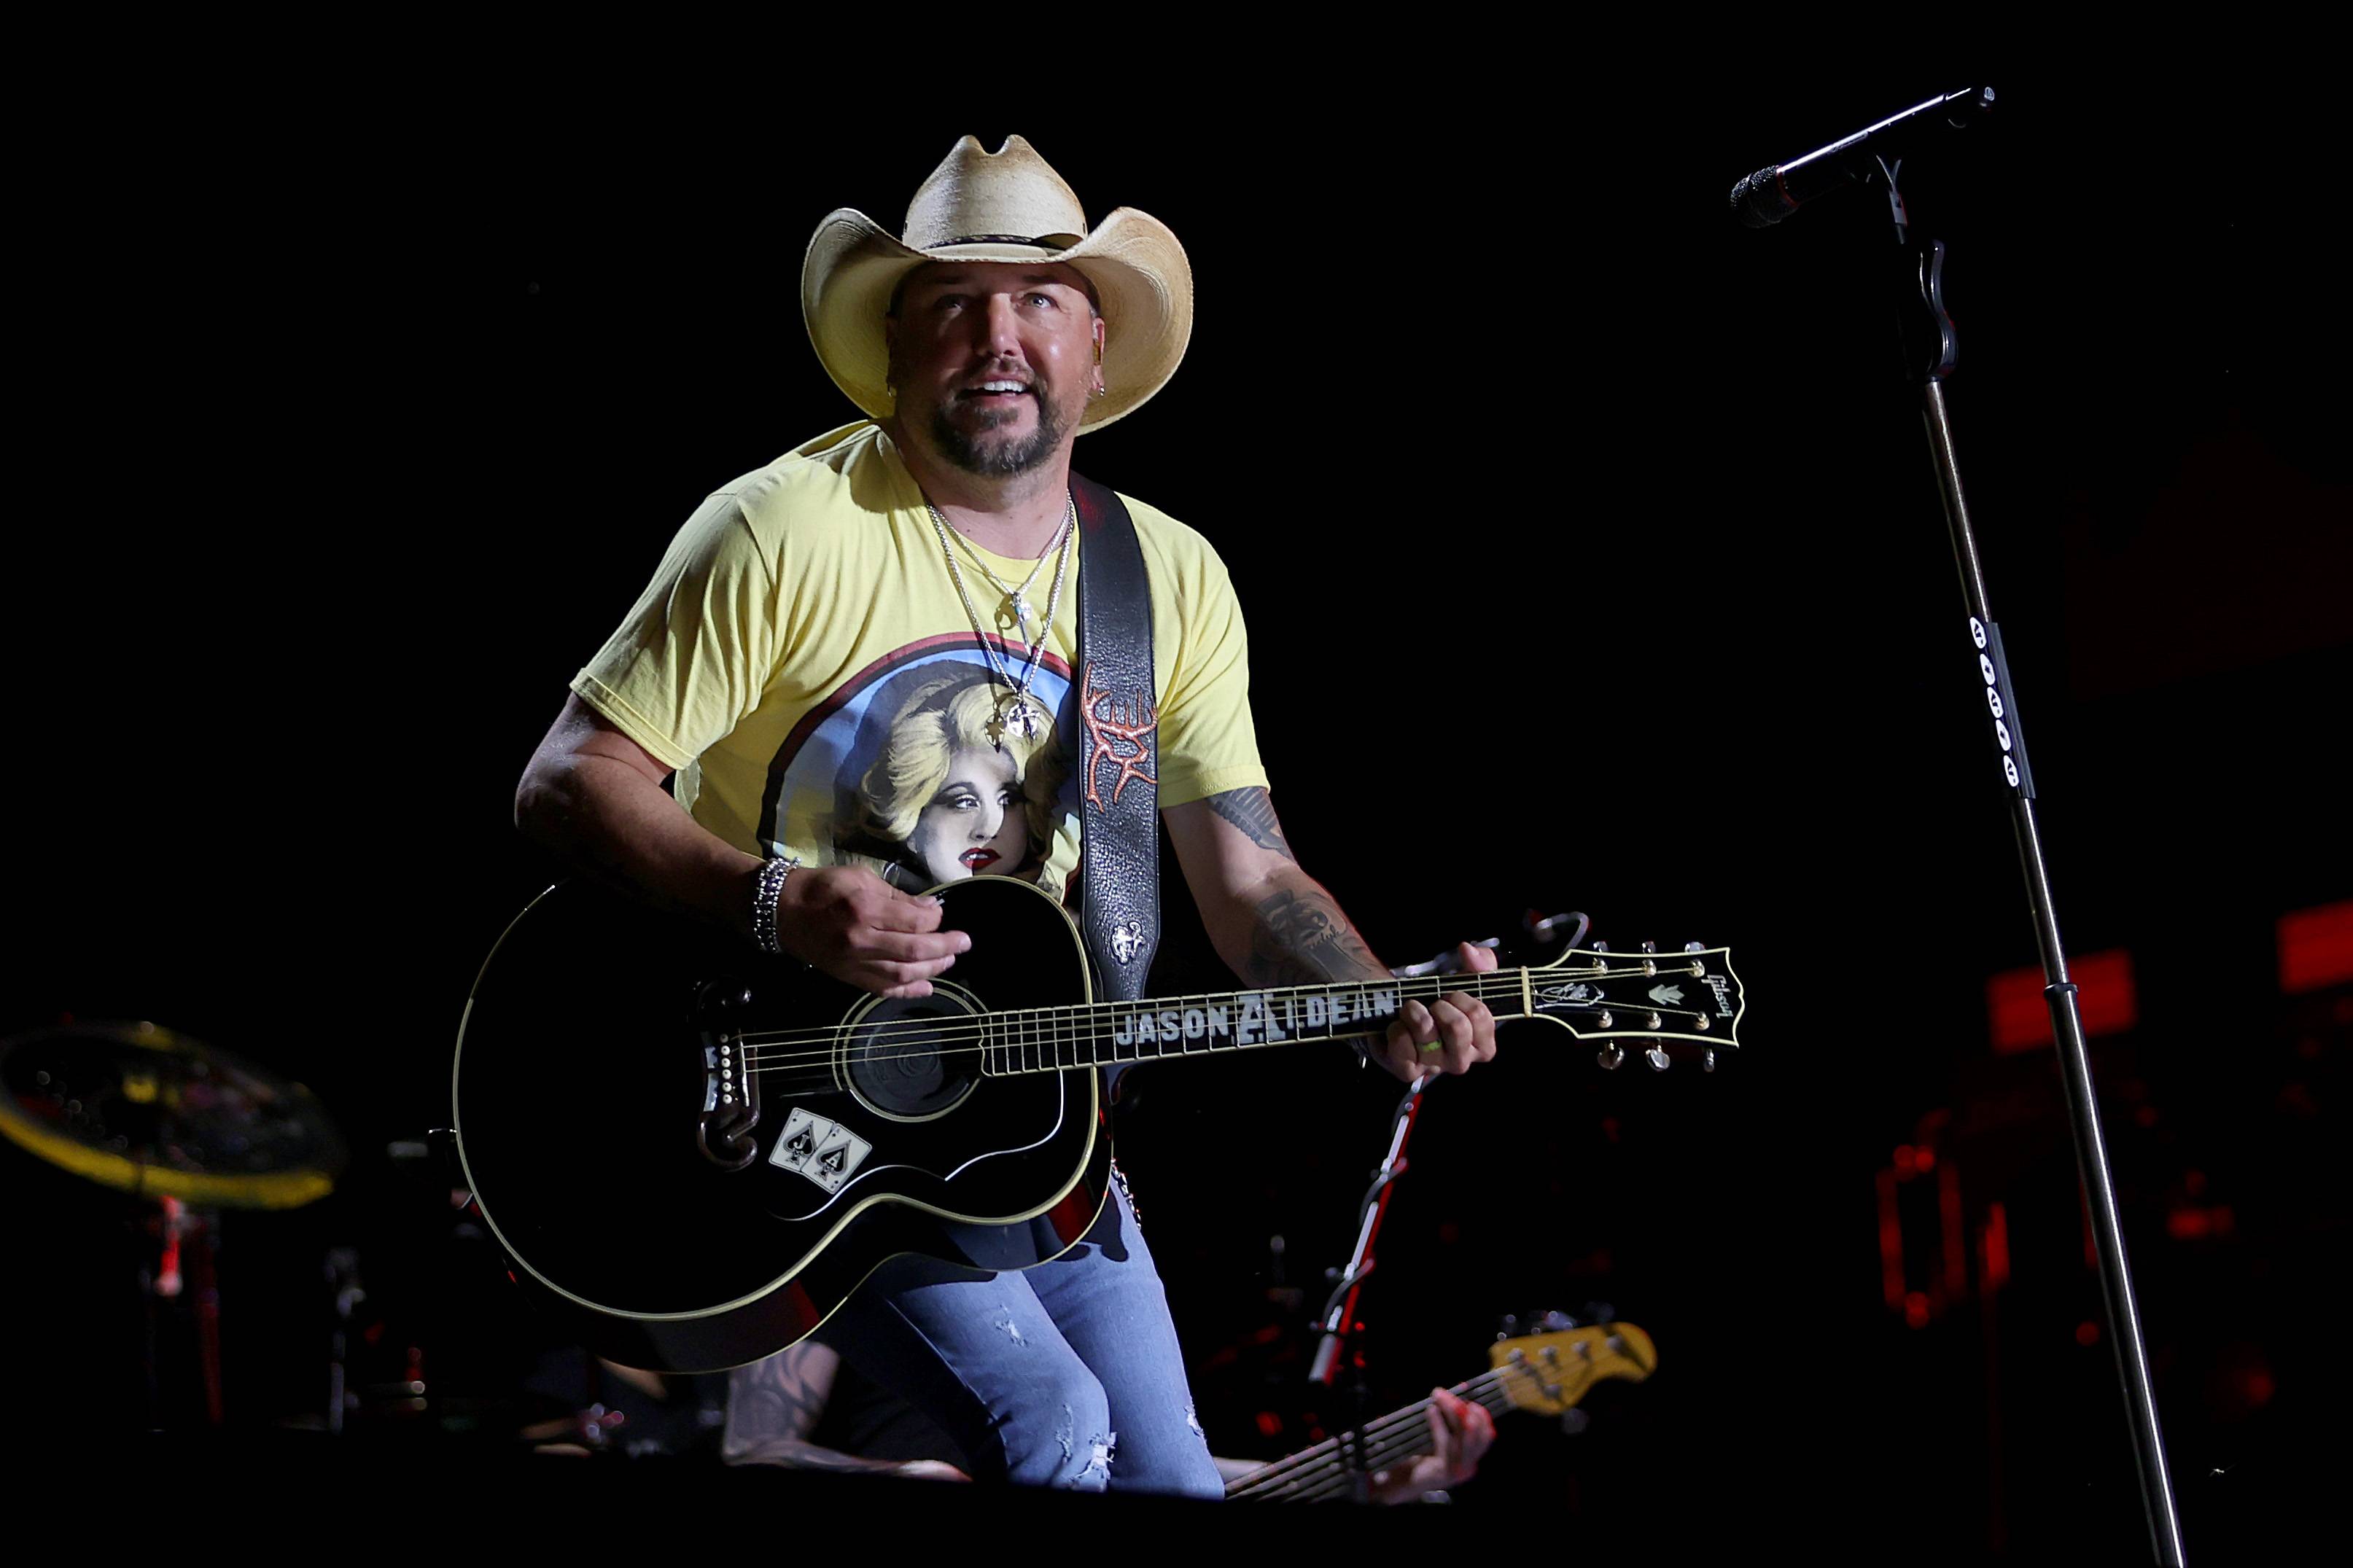 NASHVILLE, TENNESSEE - JUNE 09: Jason Aldean performs during day 1 of CMA Fest 2022 at Nissan Stadium on June 09, 2022 in Nashville, Tennessee. 